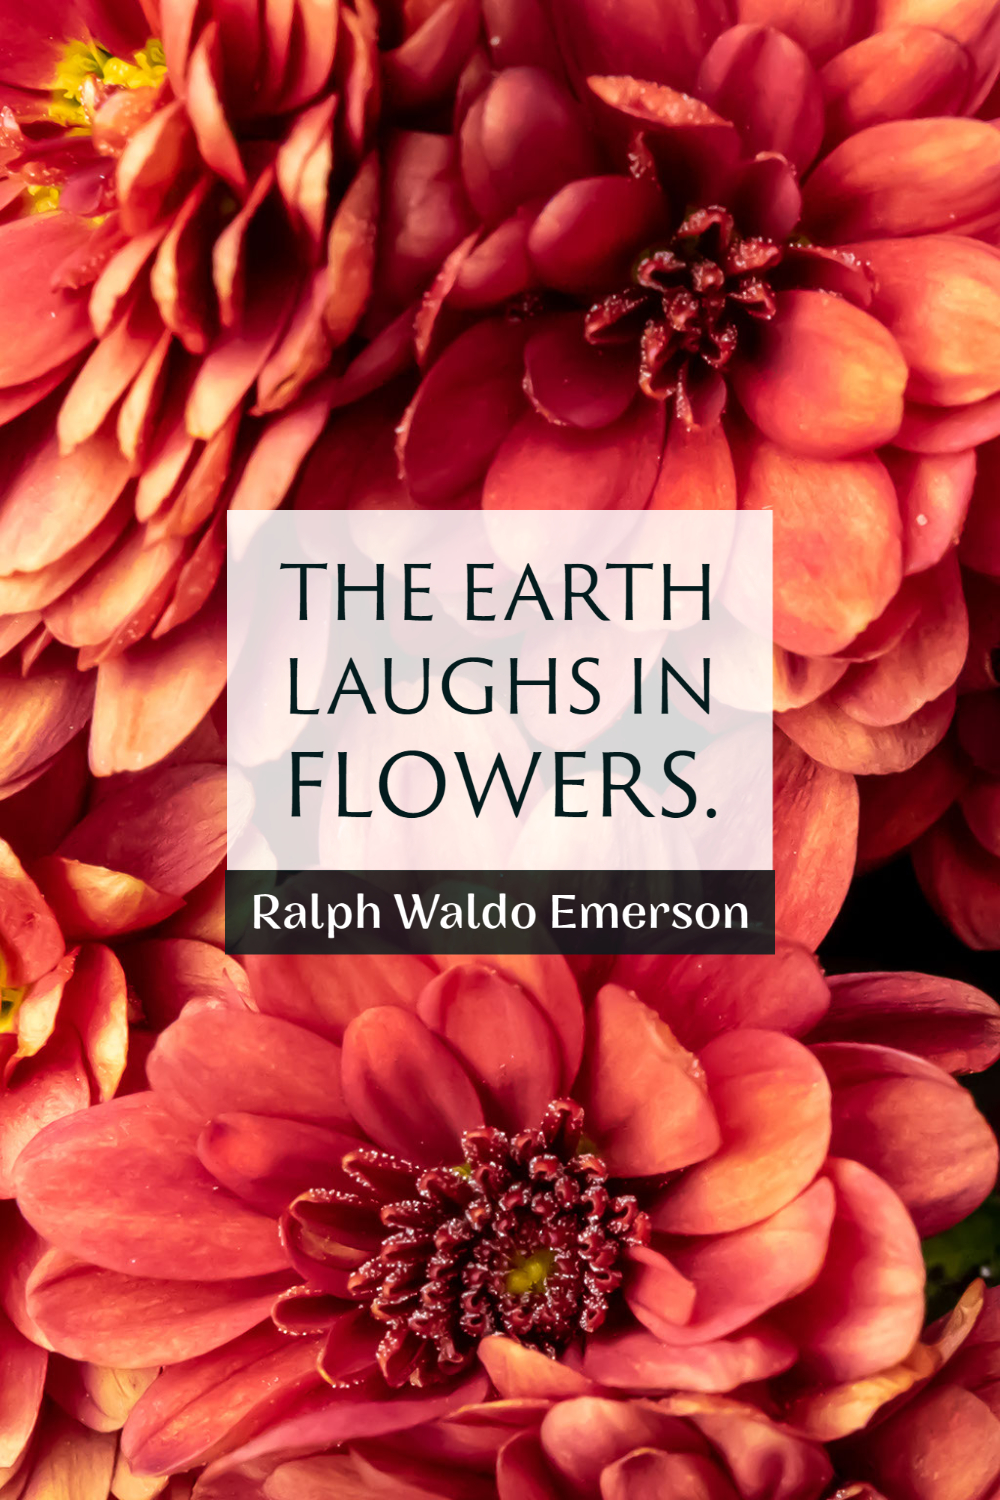 "The earth laughs in flowers." ~Ralph Waldo Emerson